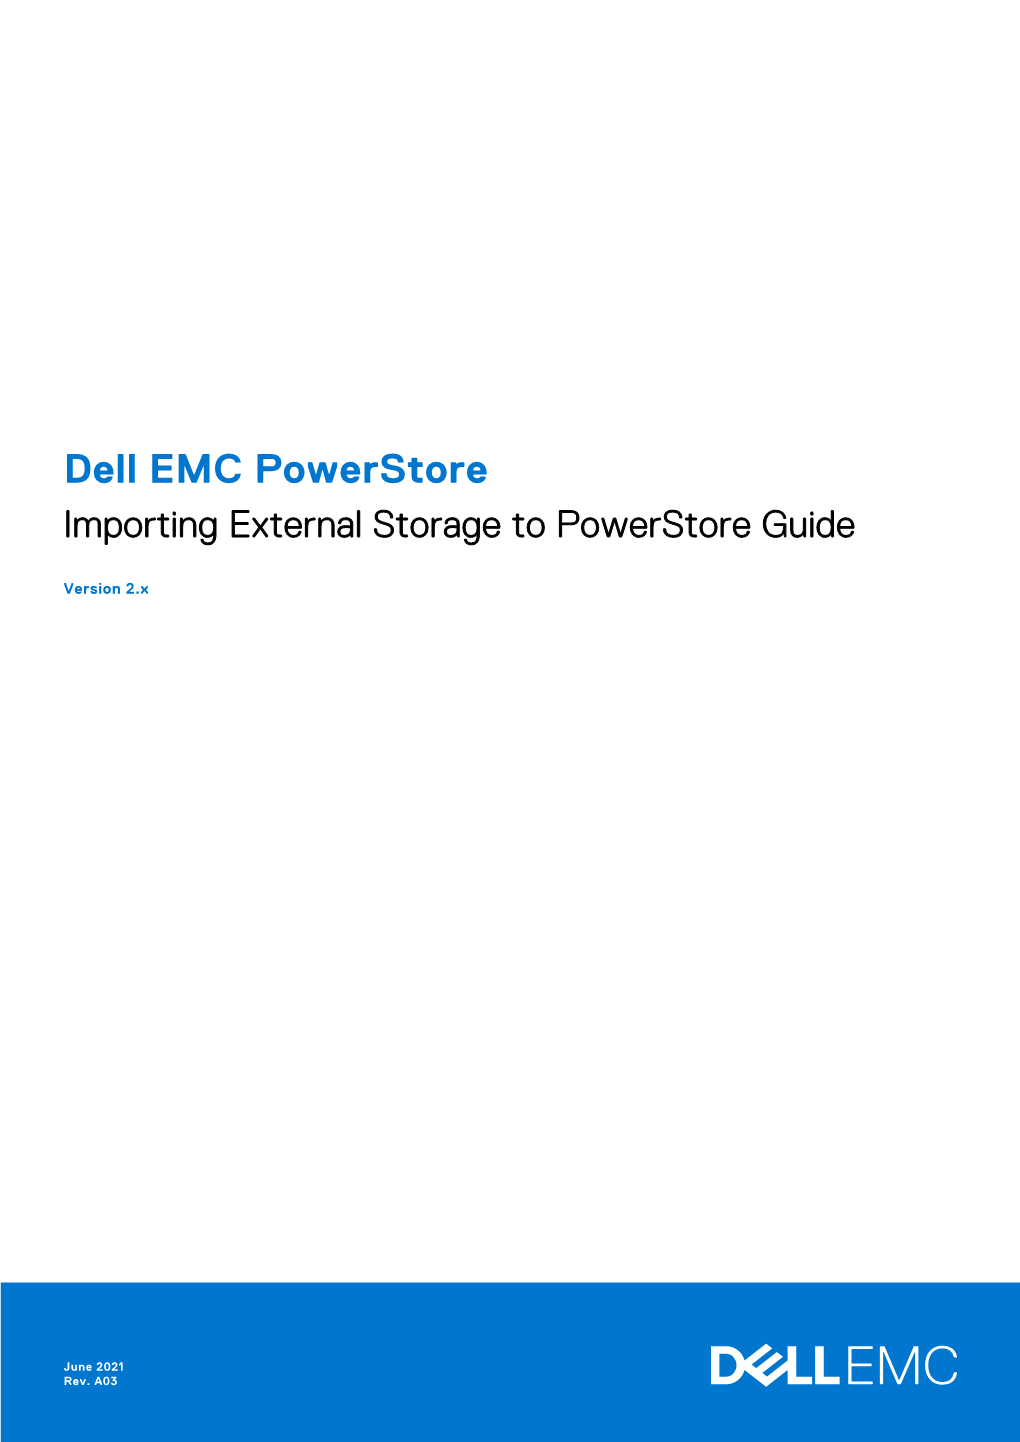 Importing External Storage to Powerstore Guide